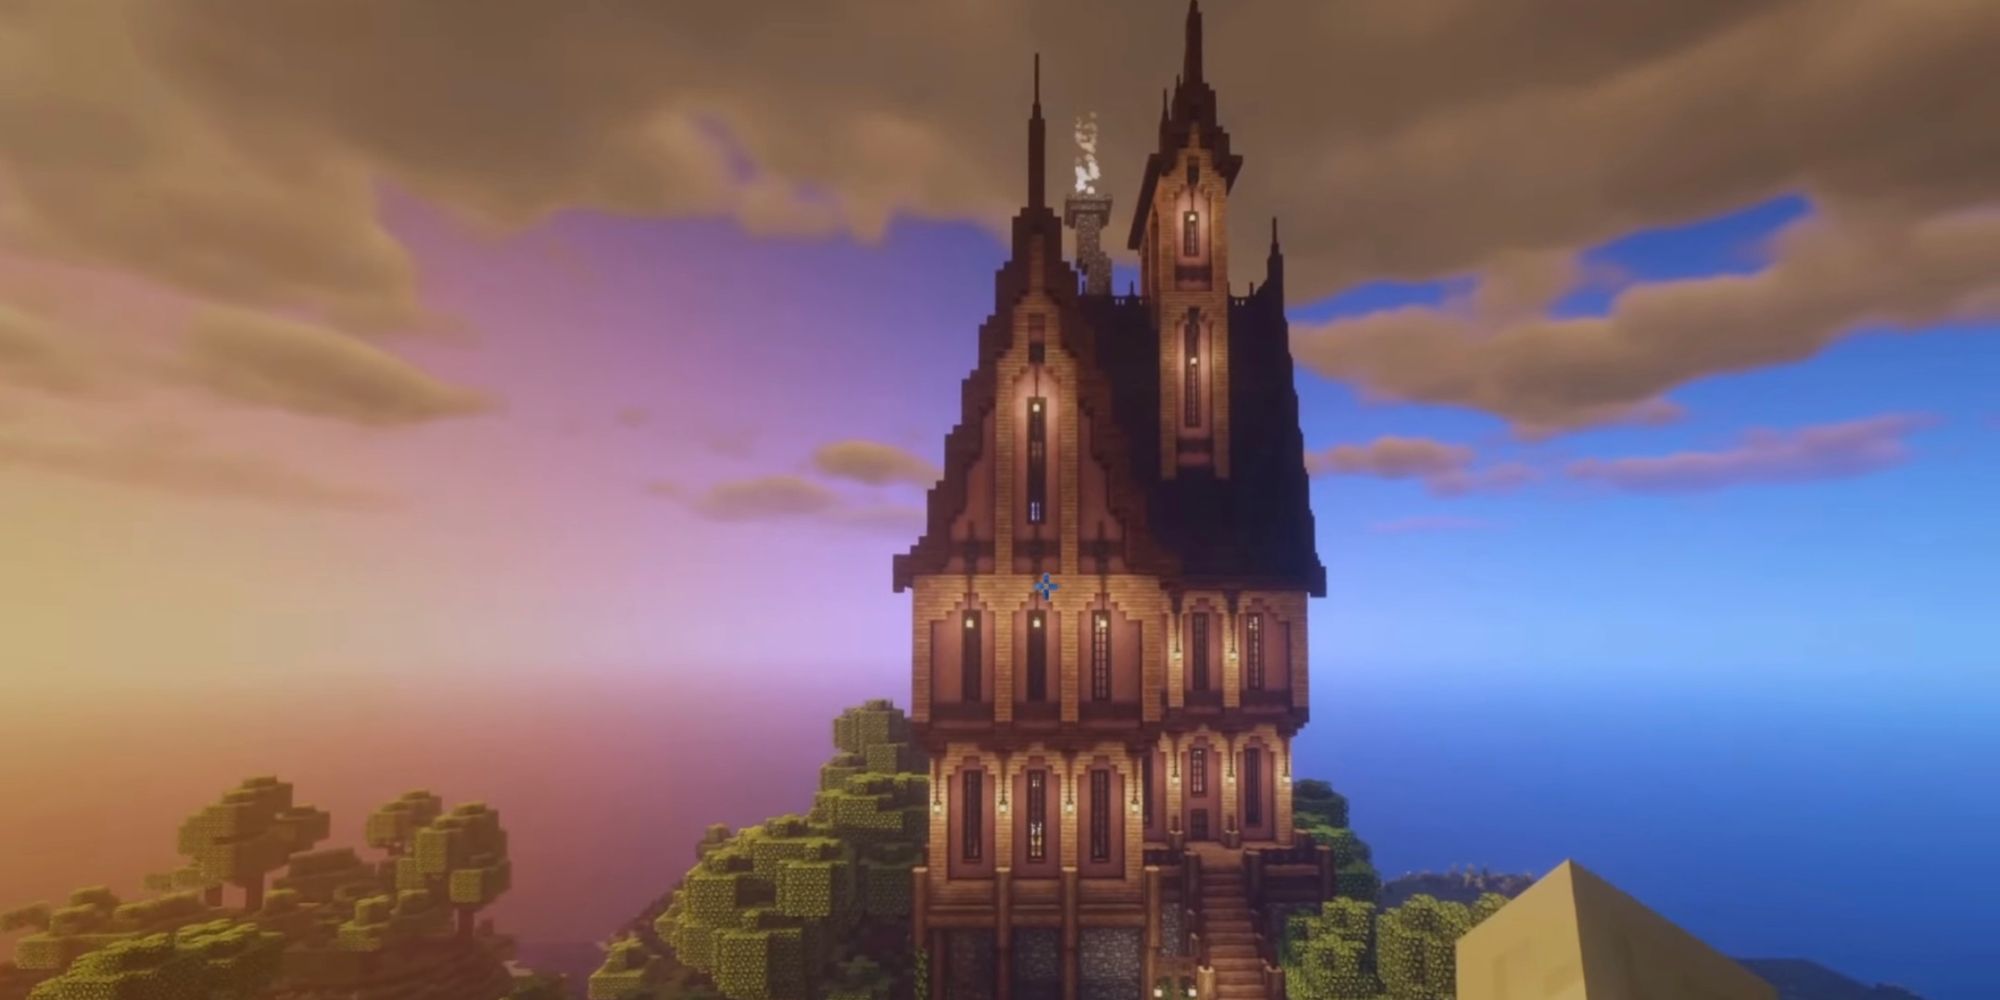 An image from Minecraft of a haunted gothic Mansion that is inspired by the film Coraline.